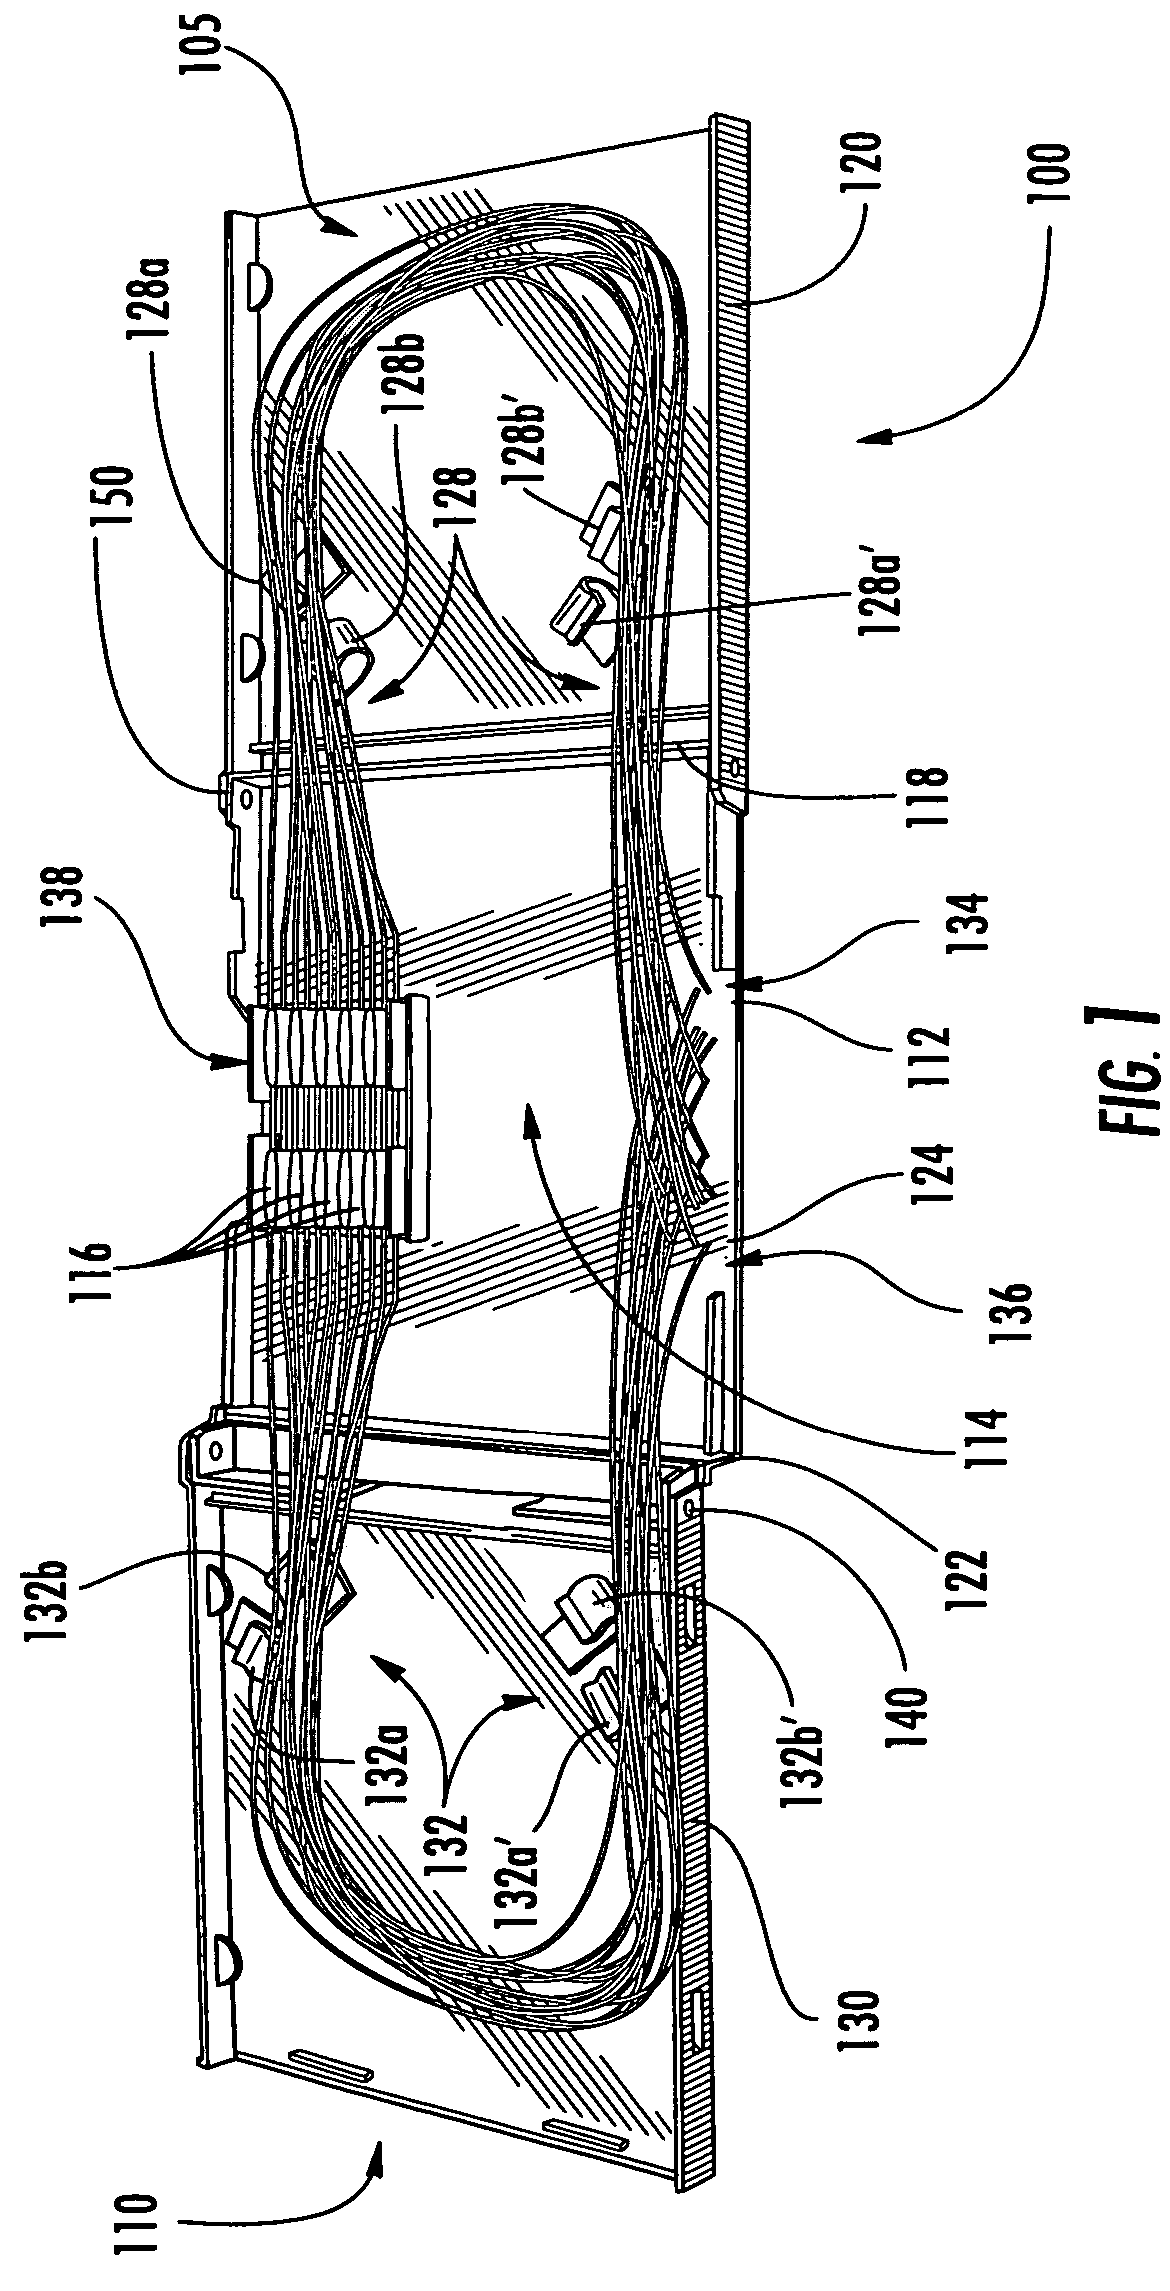 Fiber optic splice storage apparatus and methods for using the same